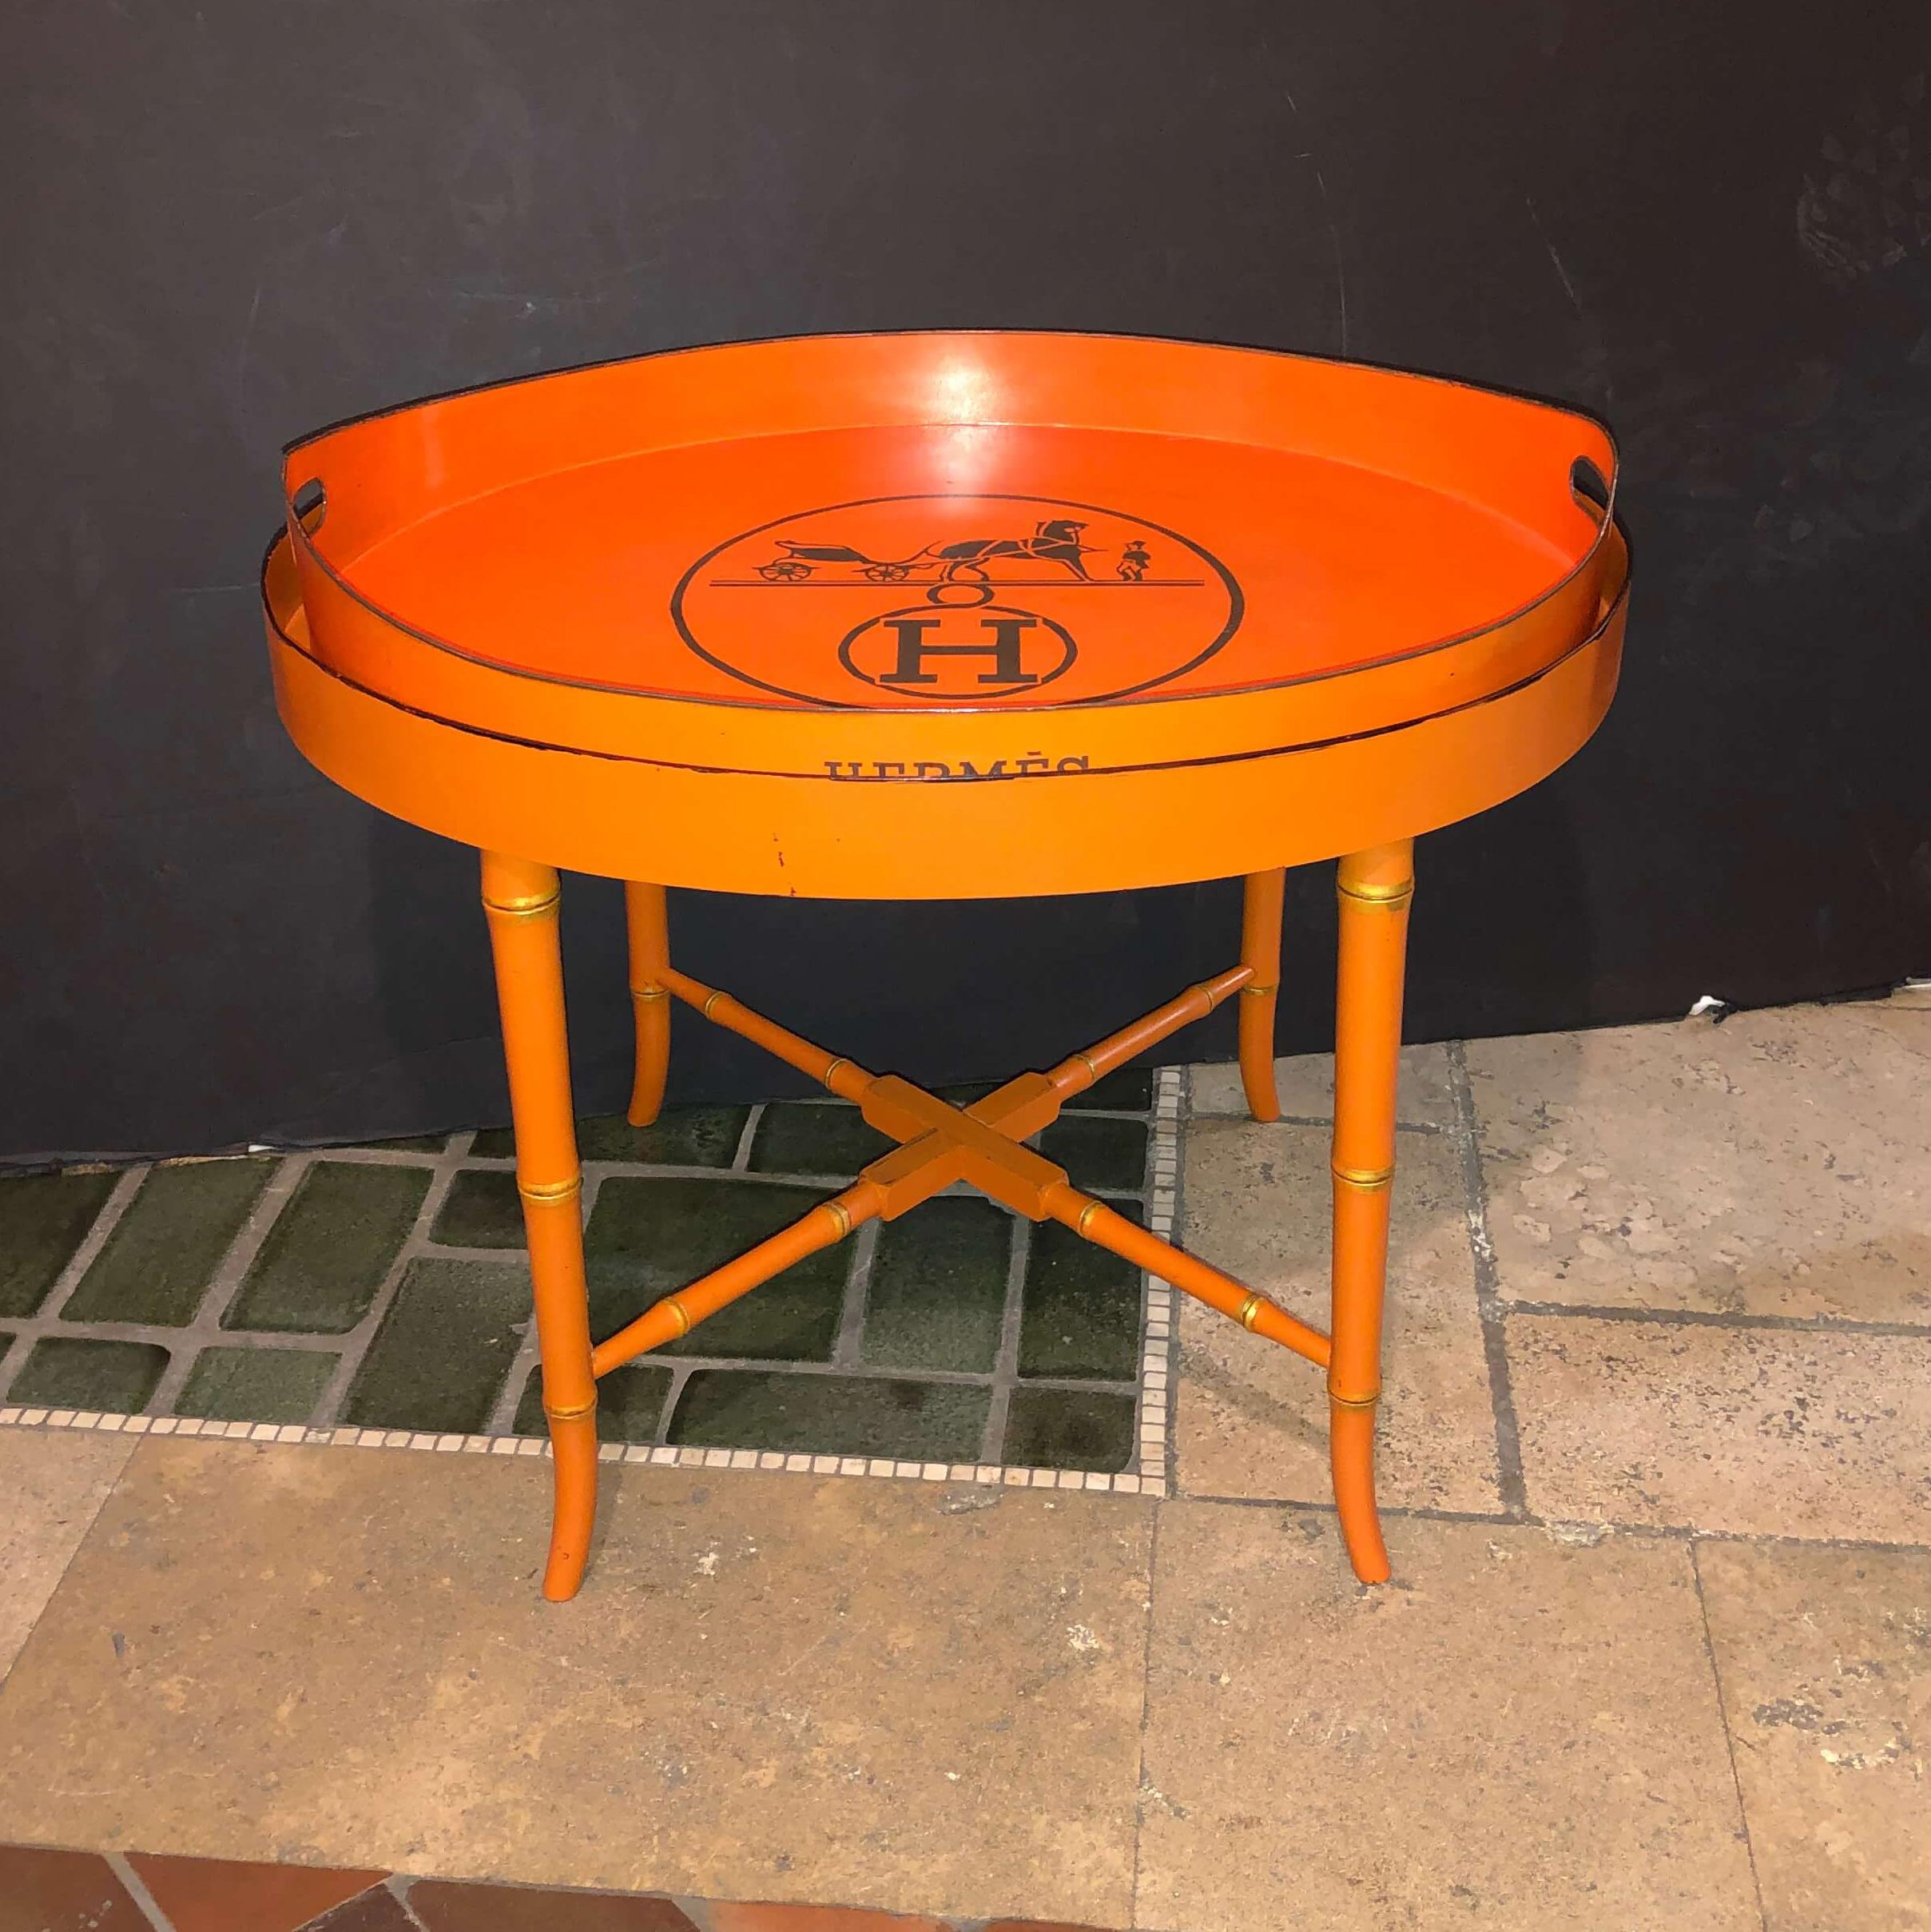 An unusual Hermes orange painted oval tray top cocktail table. The 19th century antique tray, painted Hermes orange and with Hermes logo, on a later faux bamboo base.